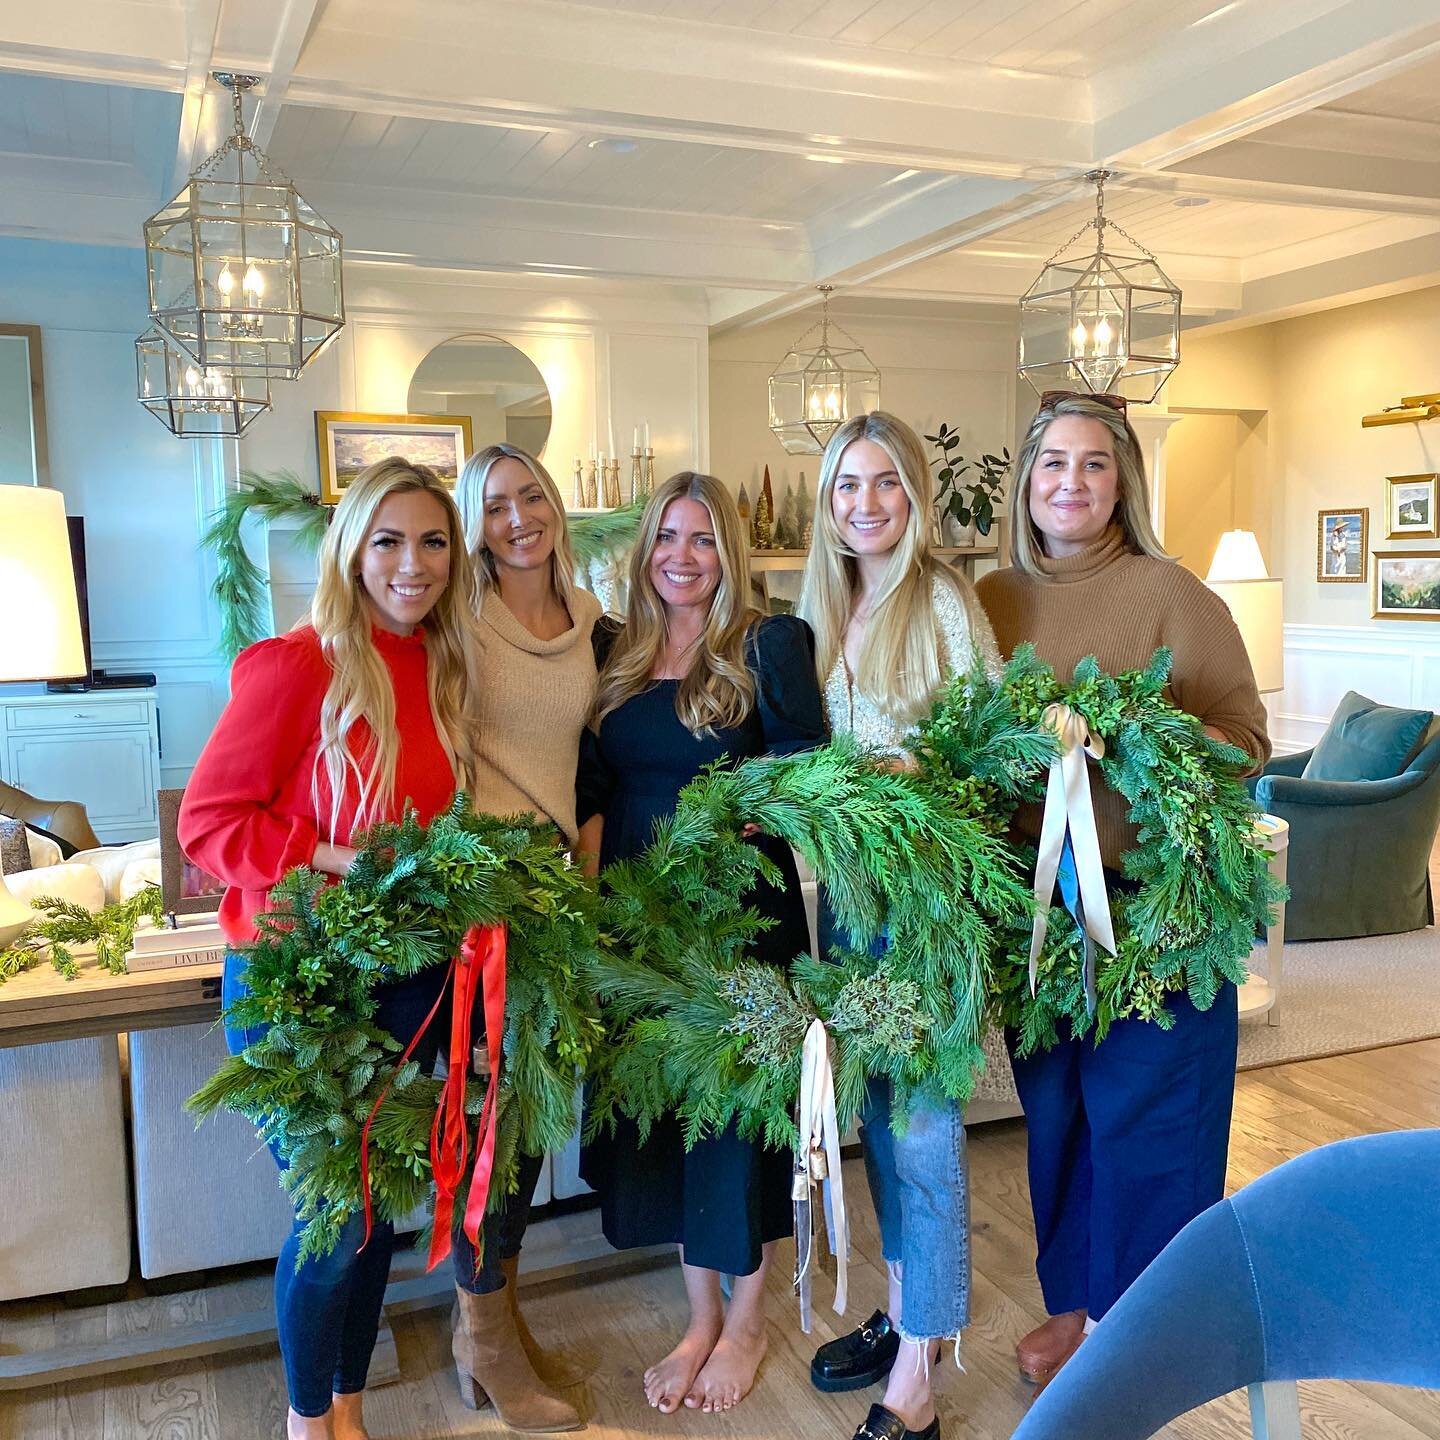 So fun to kick off the season with a bang 🎄
Wreath-making is fun, festive and there are very few rules. All you need are the right supplies and a hint of holiday spirit! 
A dozen wreaths made today by a dozen different women and each one was truly b